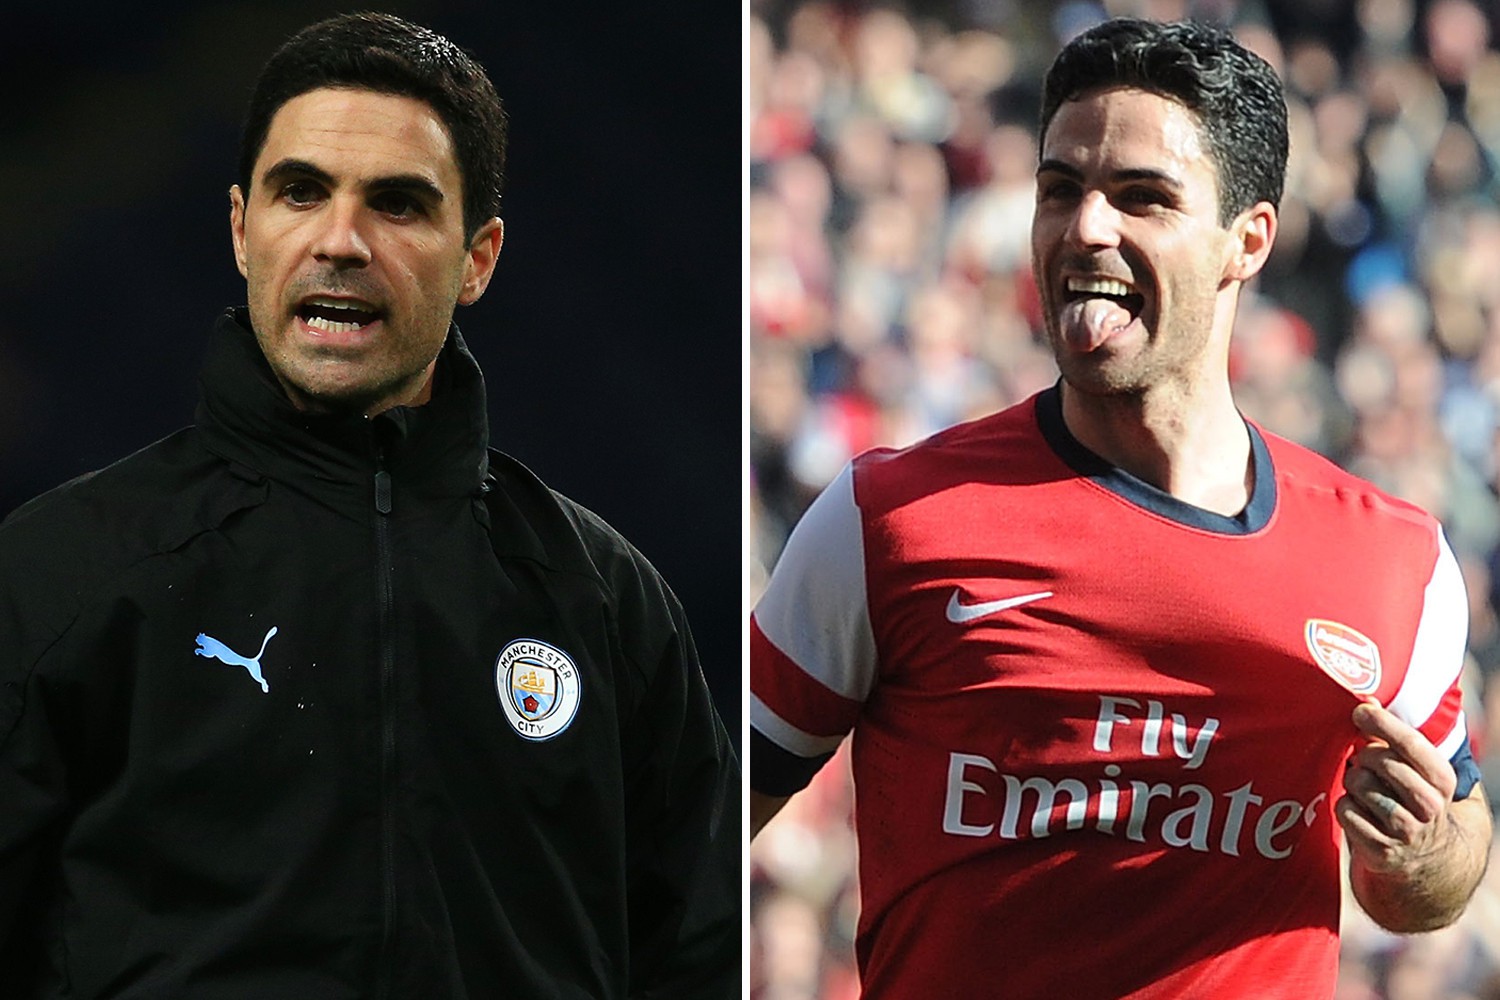 , Mikel Arteta desperate for Arsenal managers job but wants guarantees off board and does not want to upset Man City